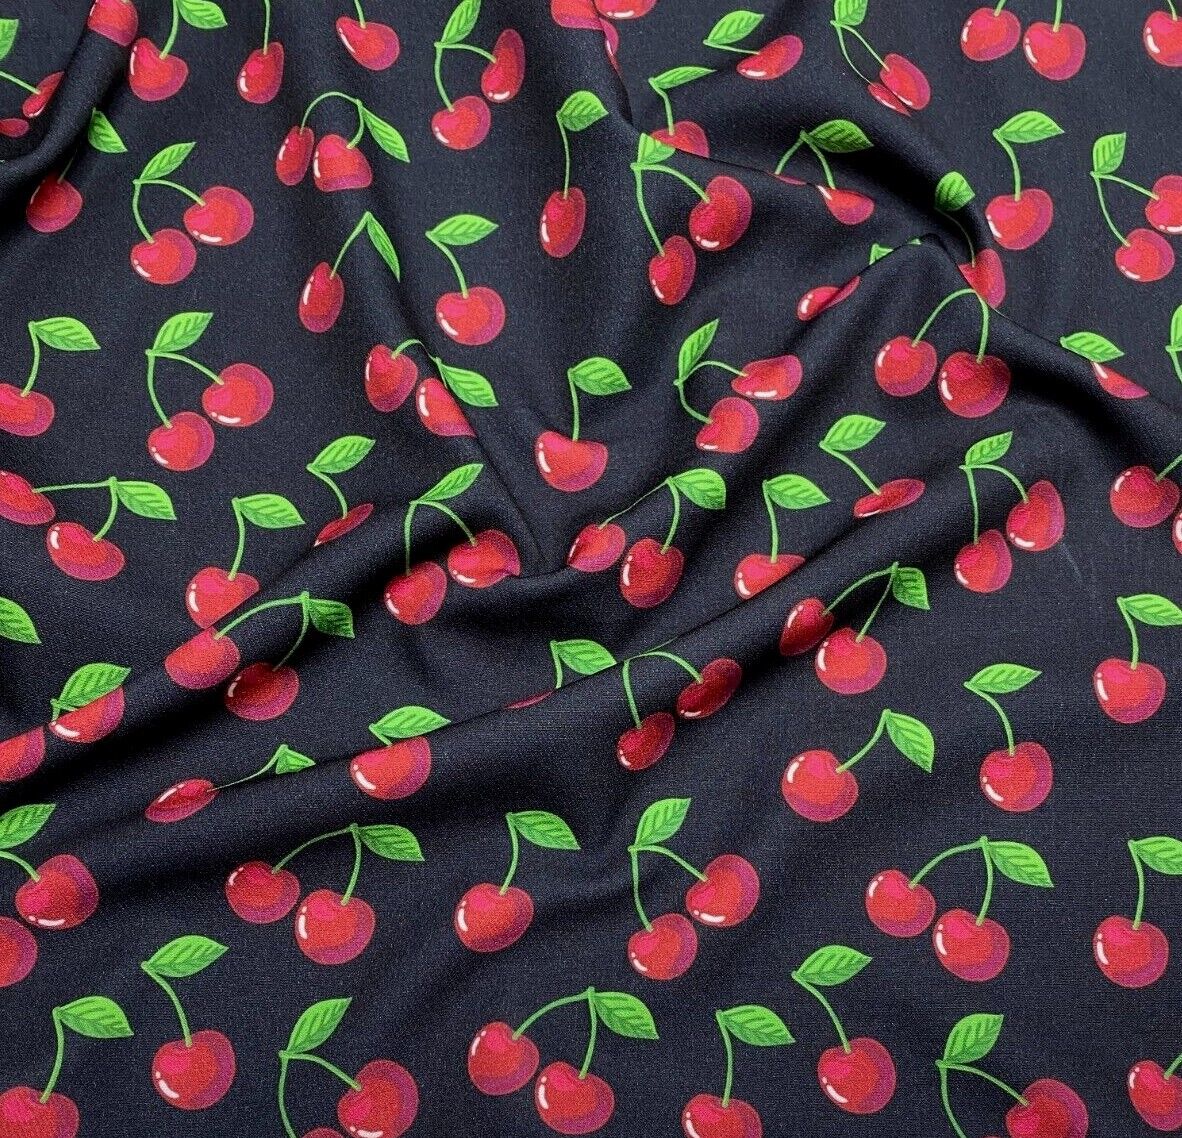 Woven Dressmaking Fabric Cherry Printed Black Colour 4 Way Stretch 55" Wide